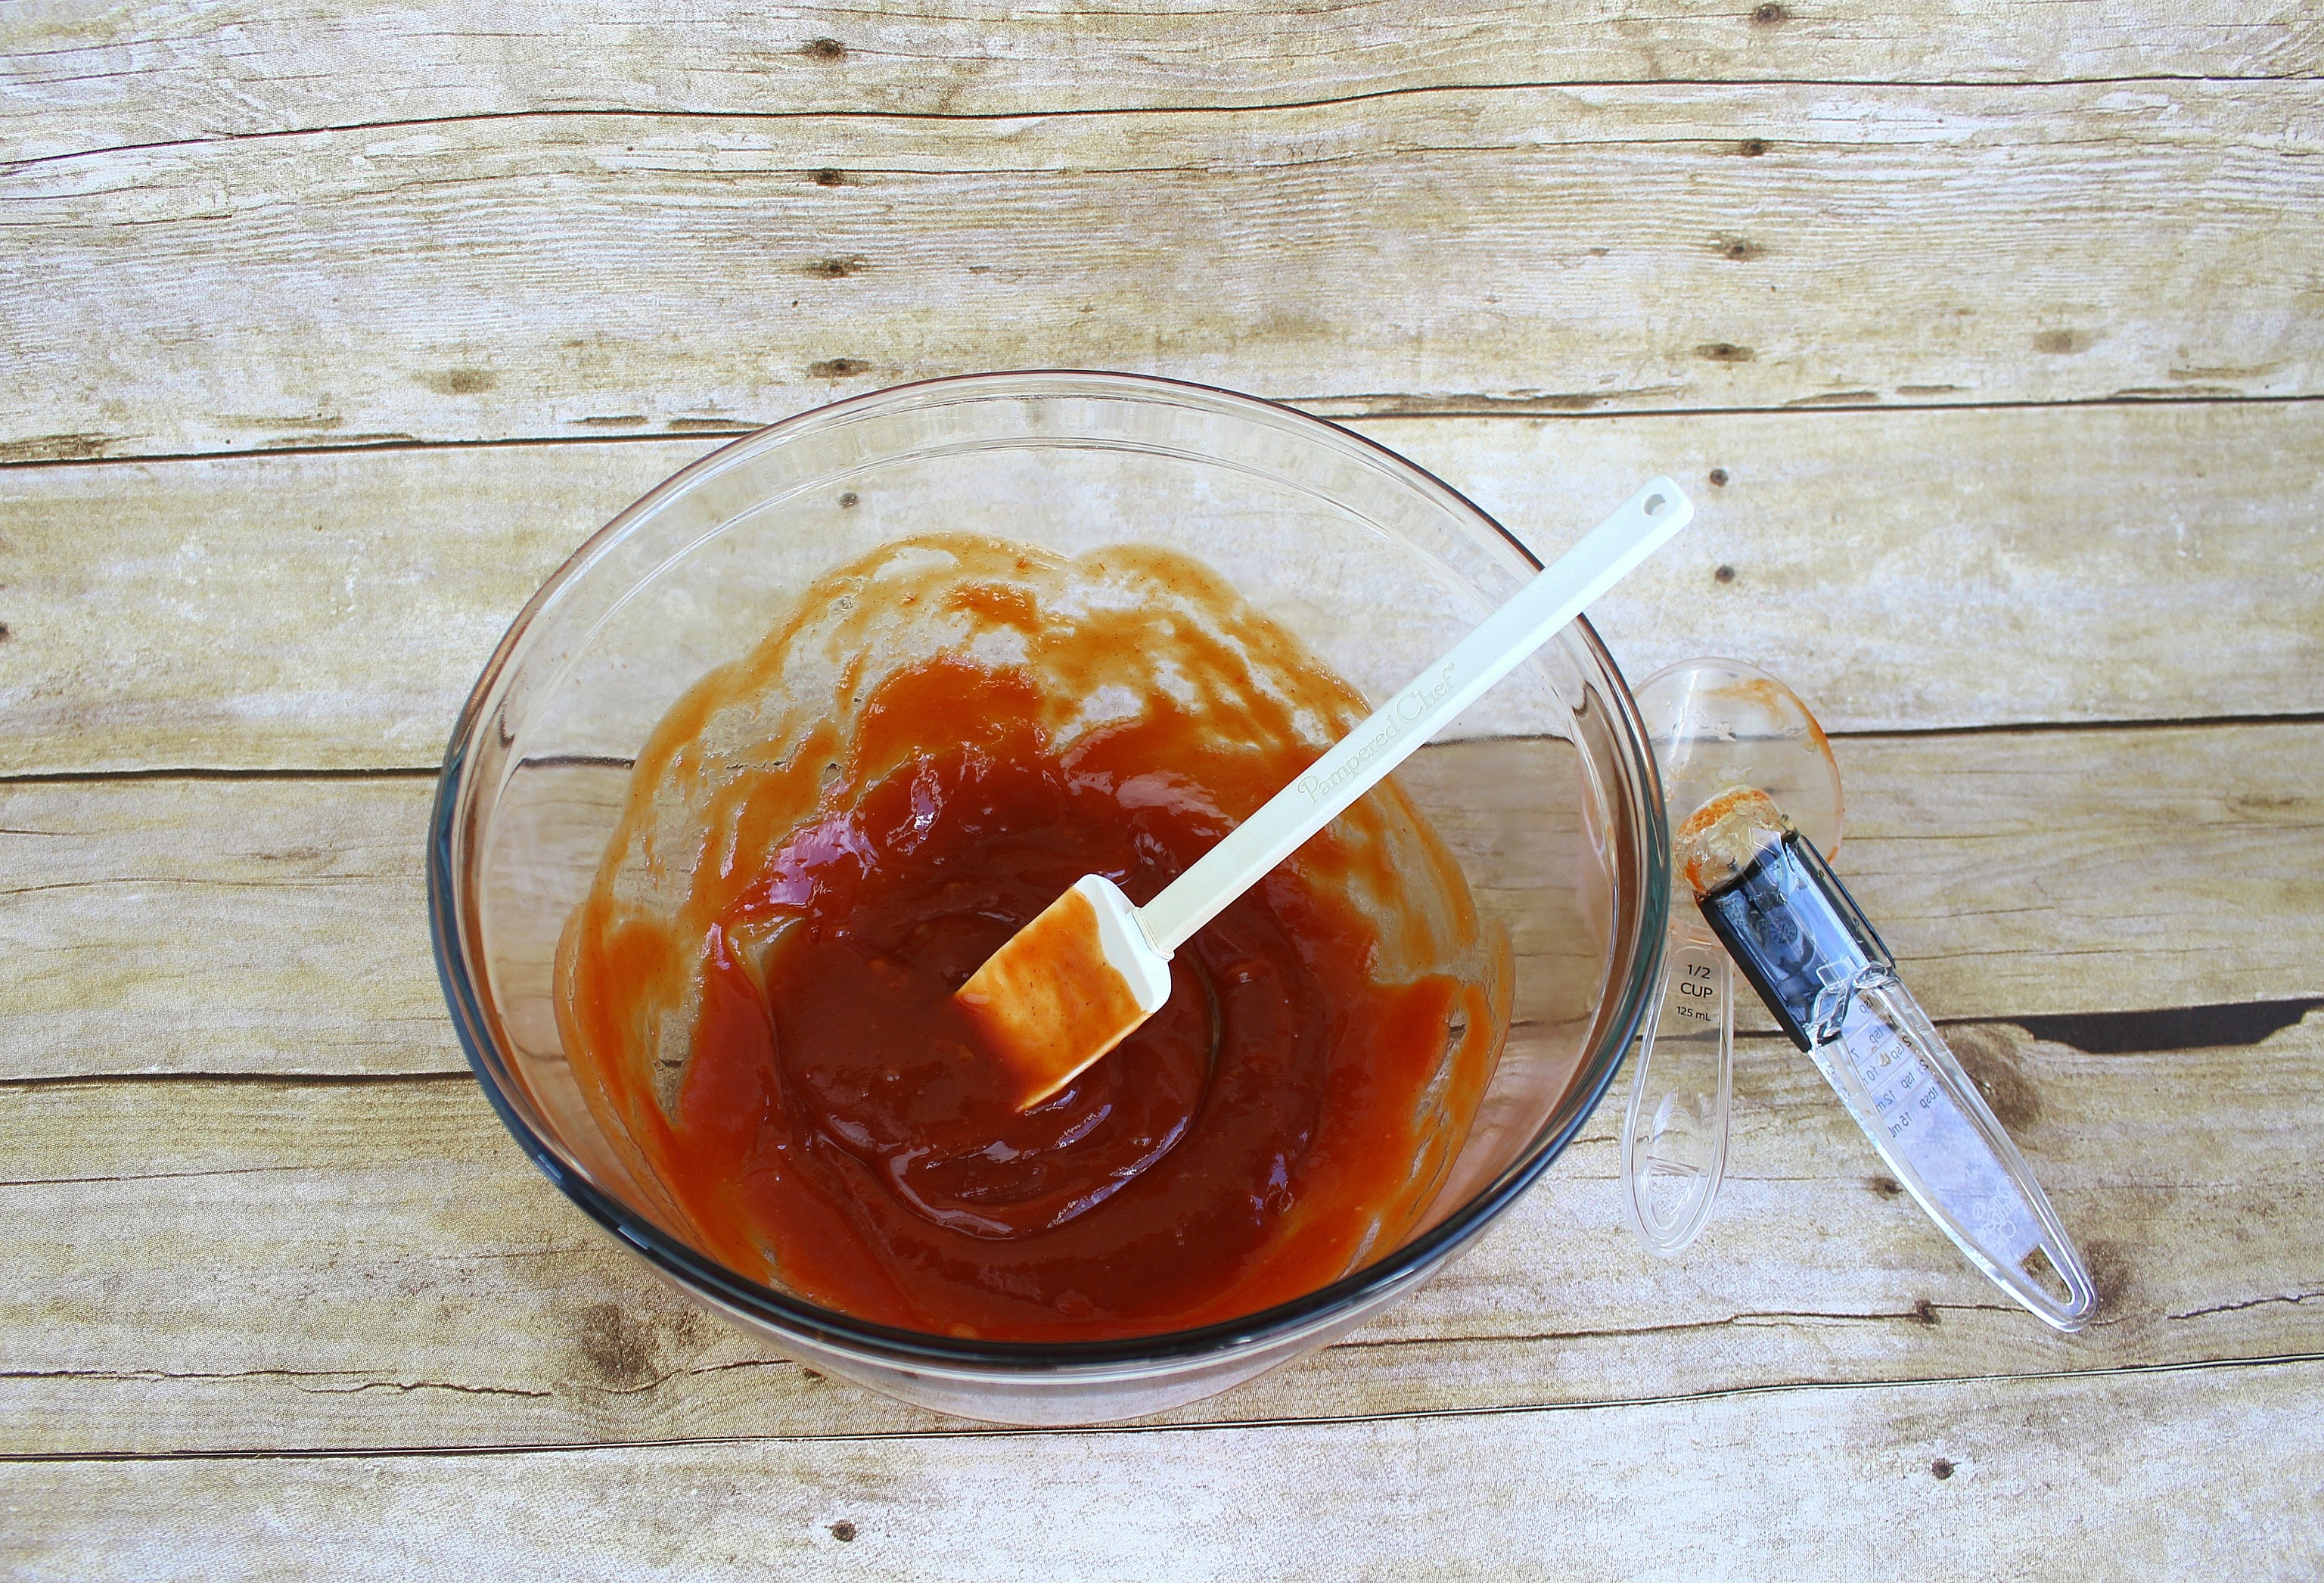 Mix together ketchup sauce ingredients in a bowl. 